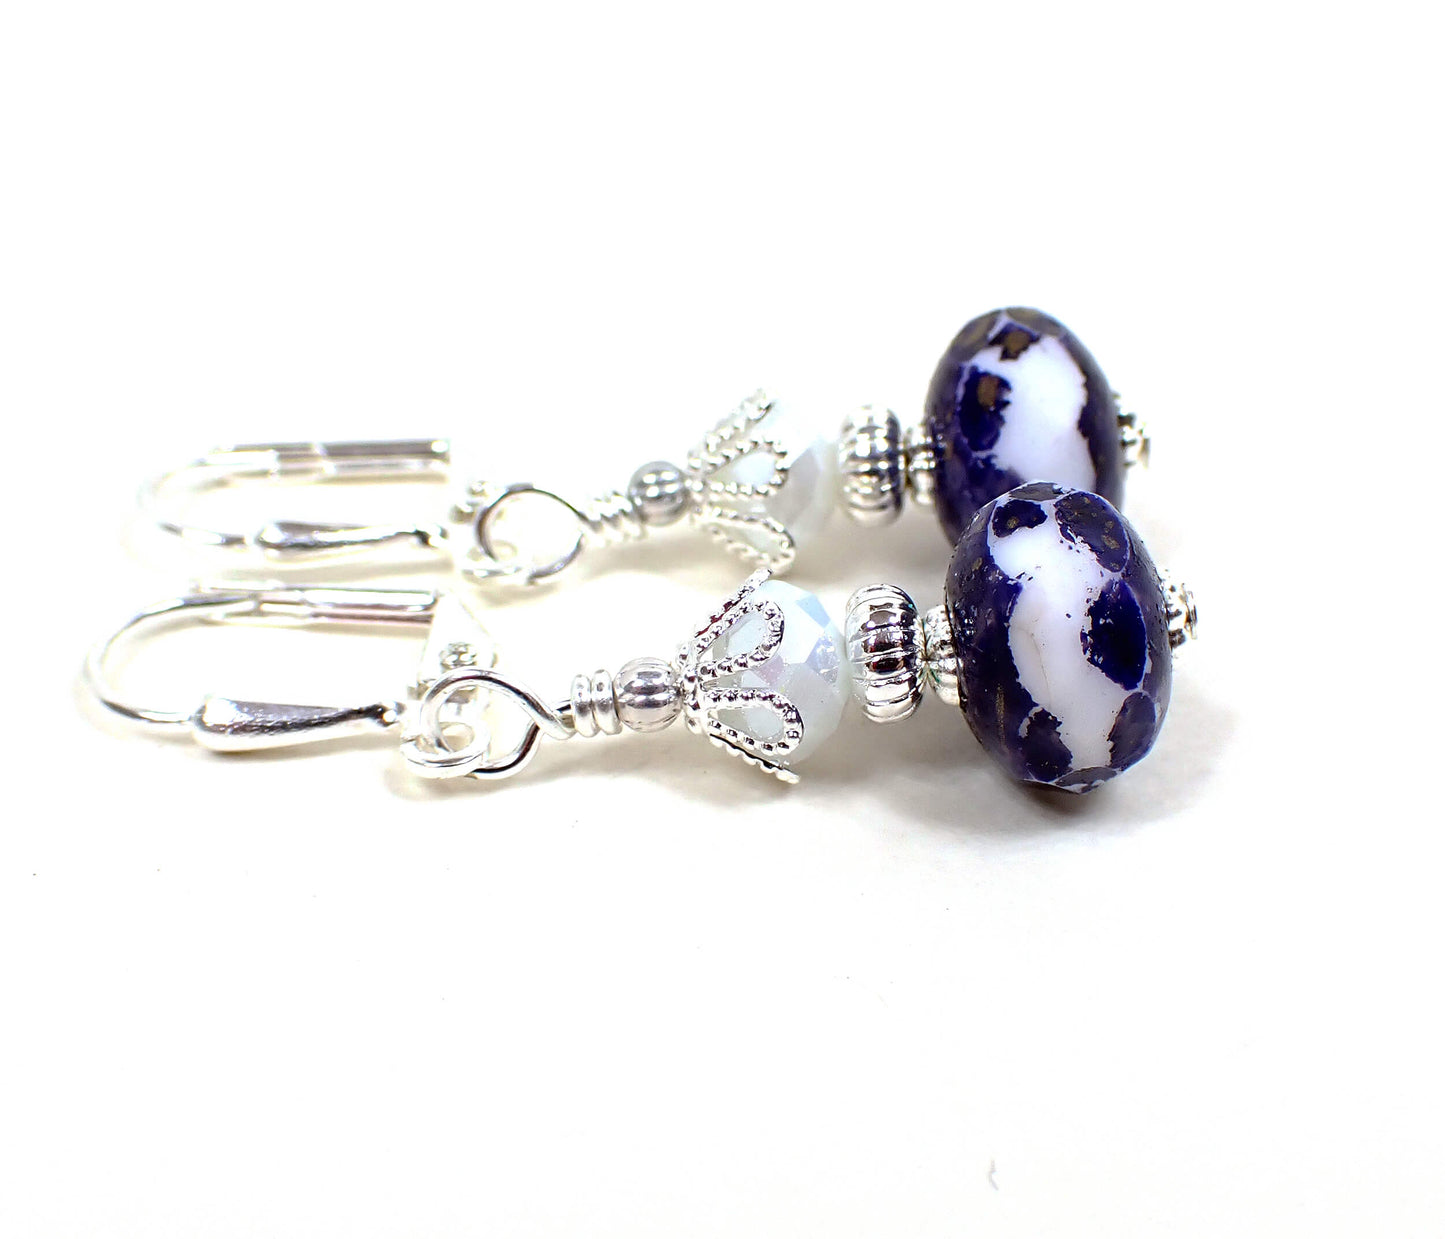 Blue and White Handmade Drop Earrings Silver Plated Hook Lever Back or Clip On